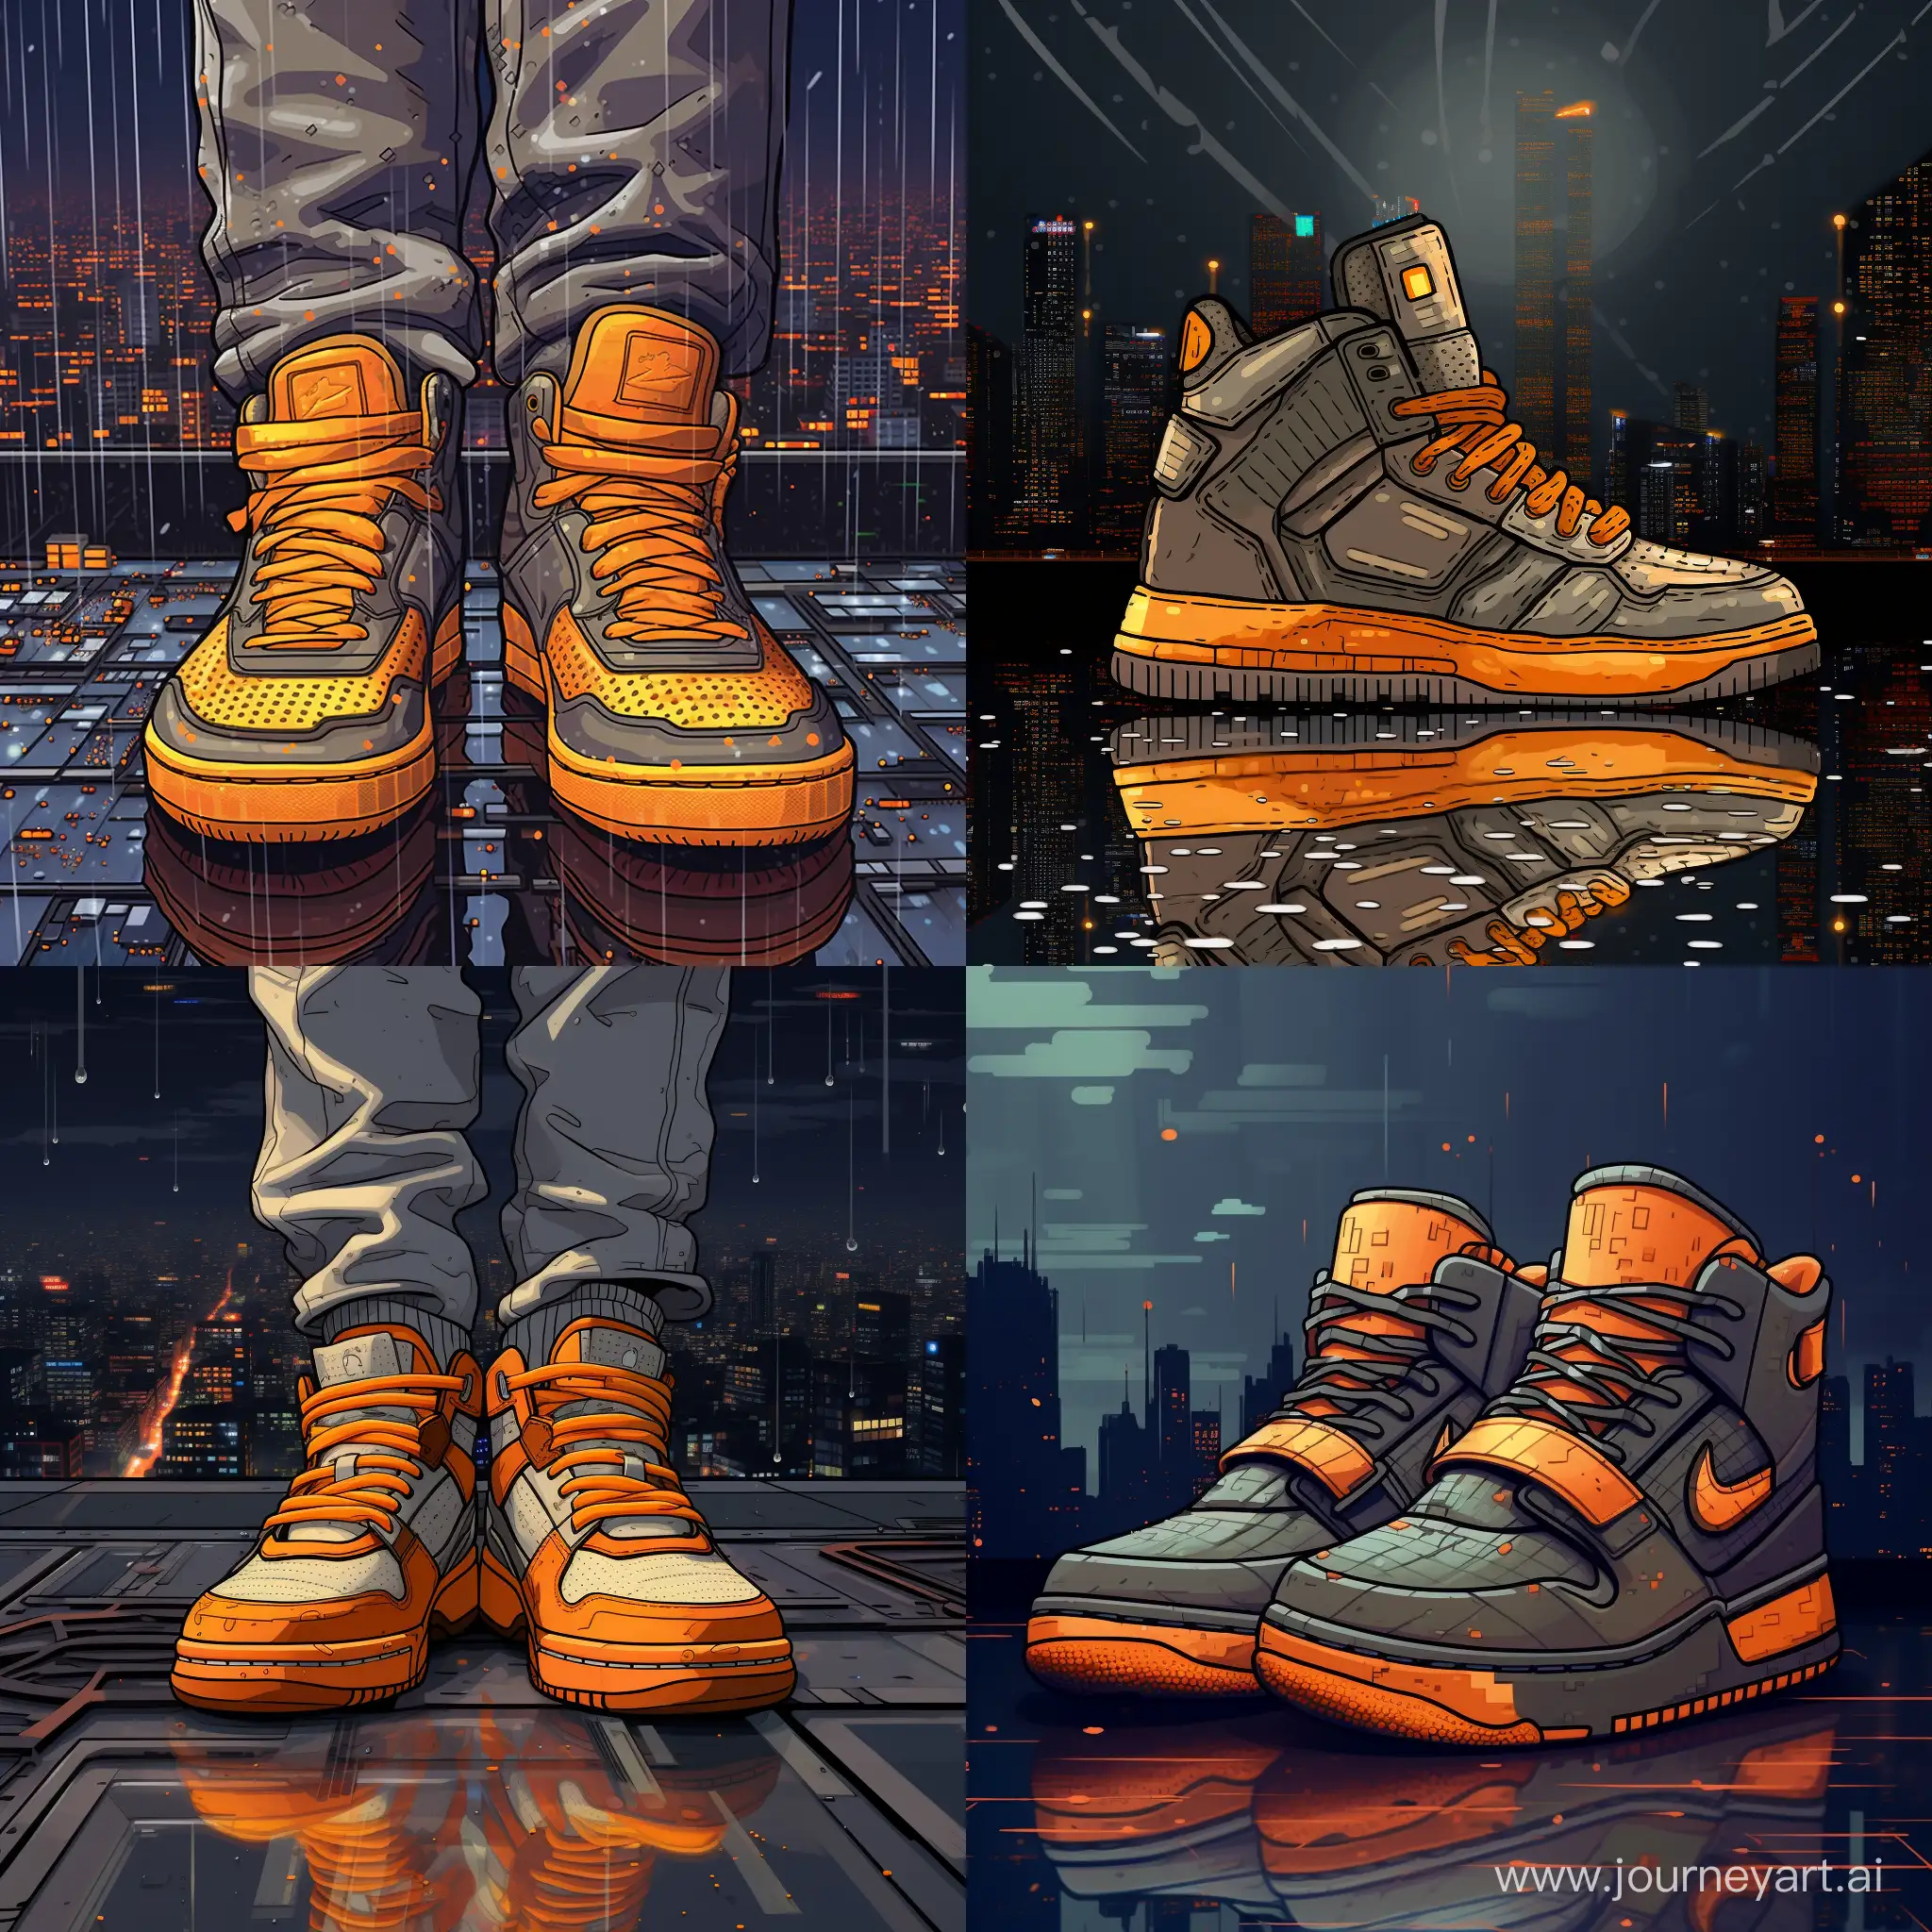 Glowing-Pixel-Art-Sneakers-in-Vibrant-Orange-and-Yellow-Amidst-a-Gray-Urban-Rain